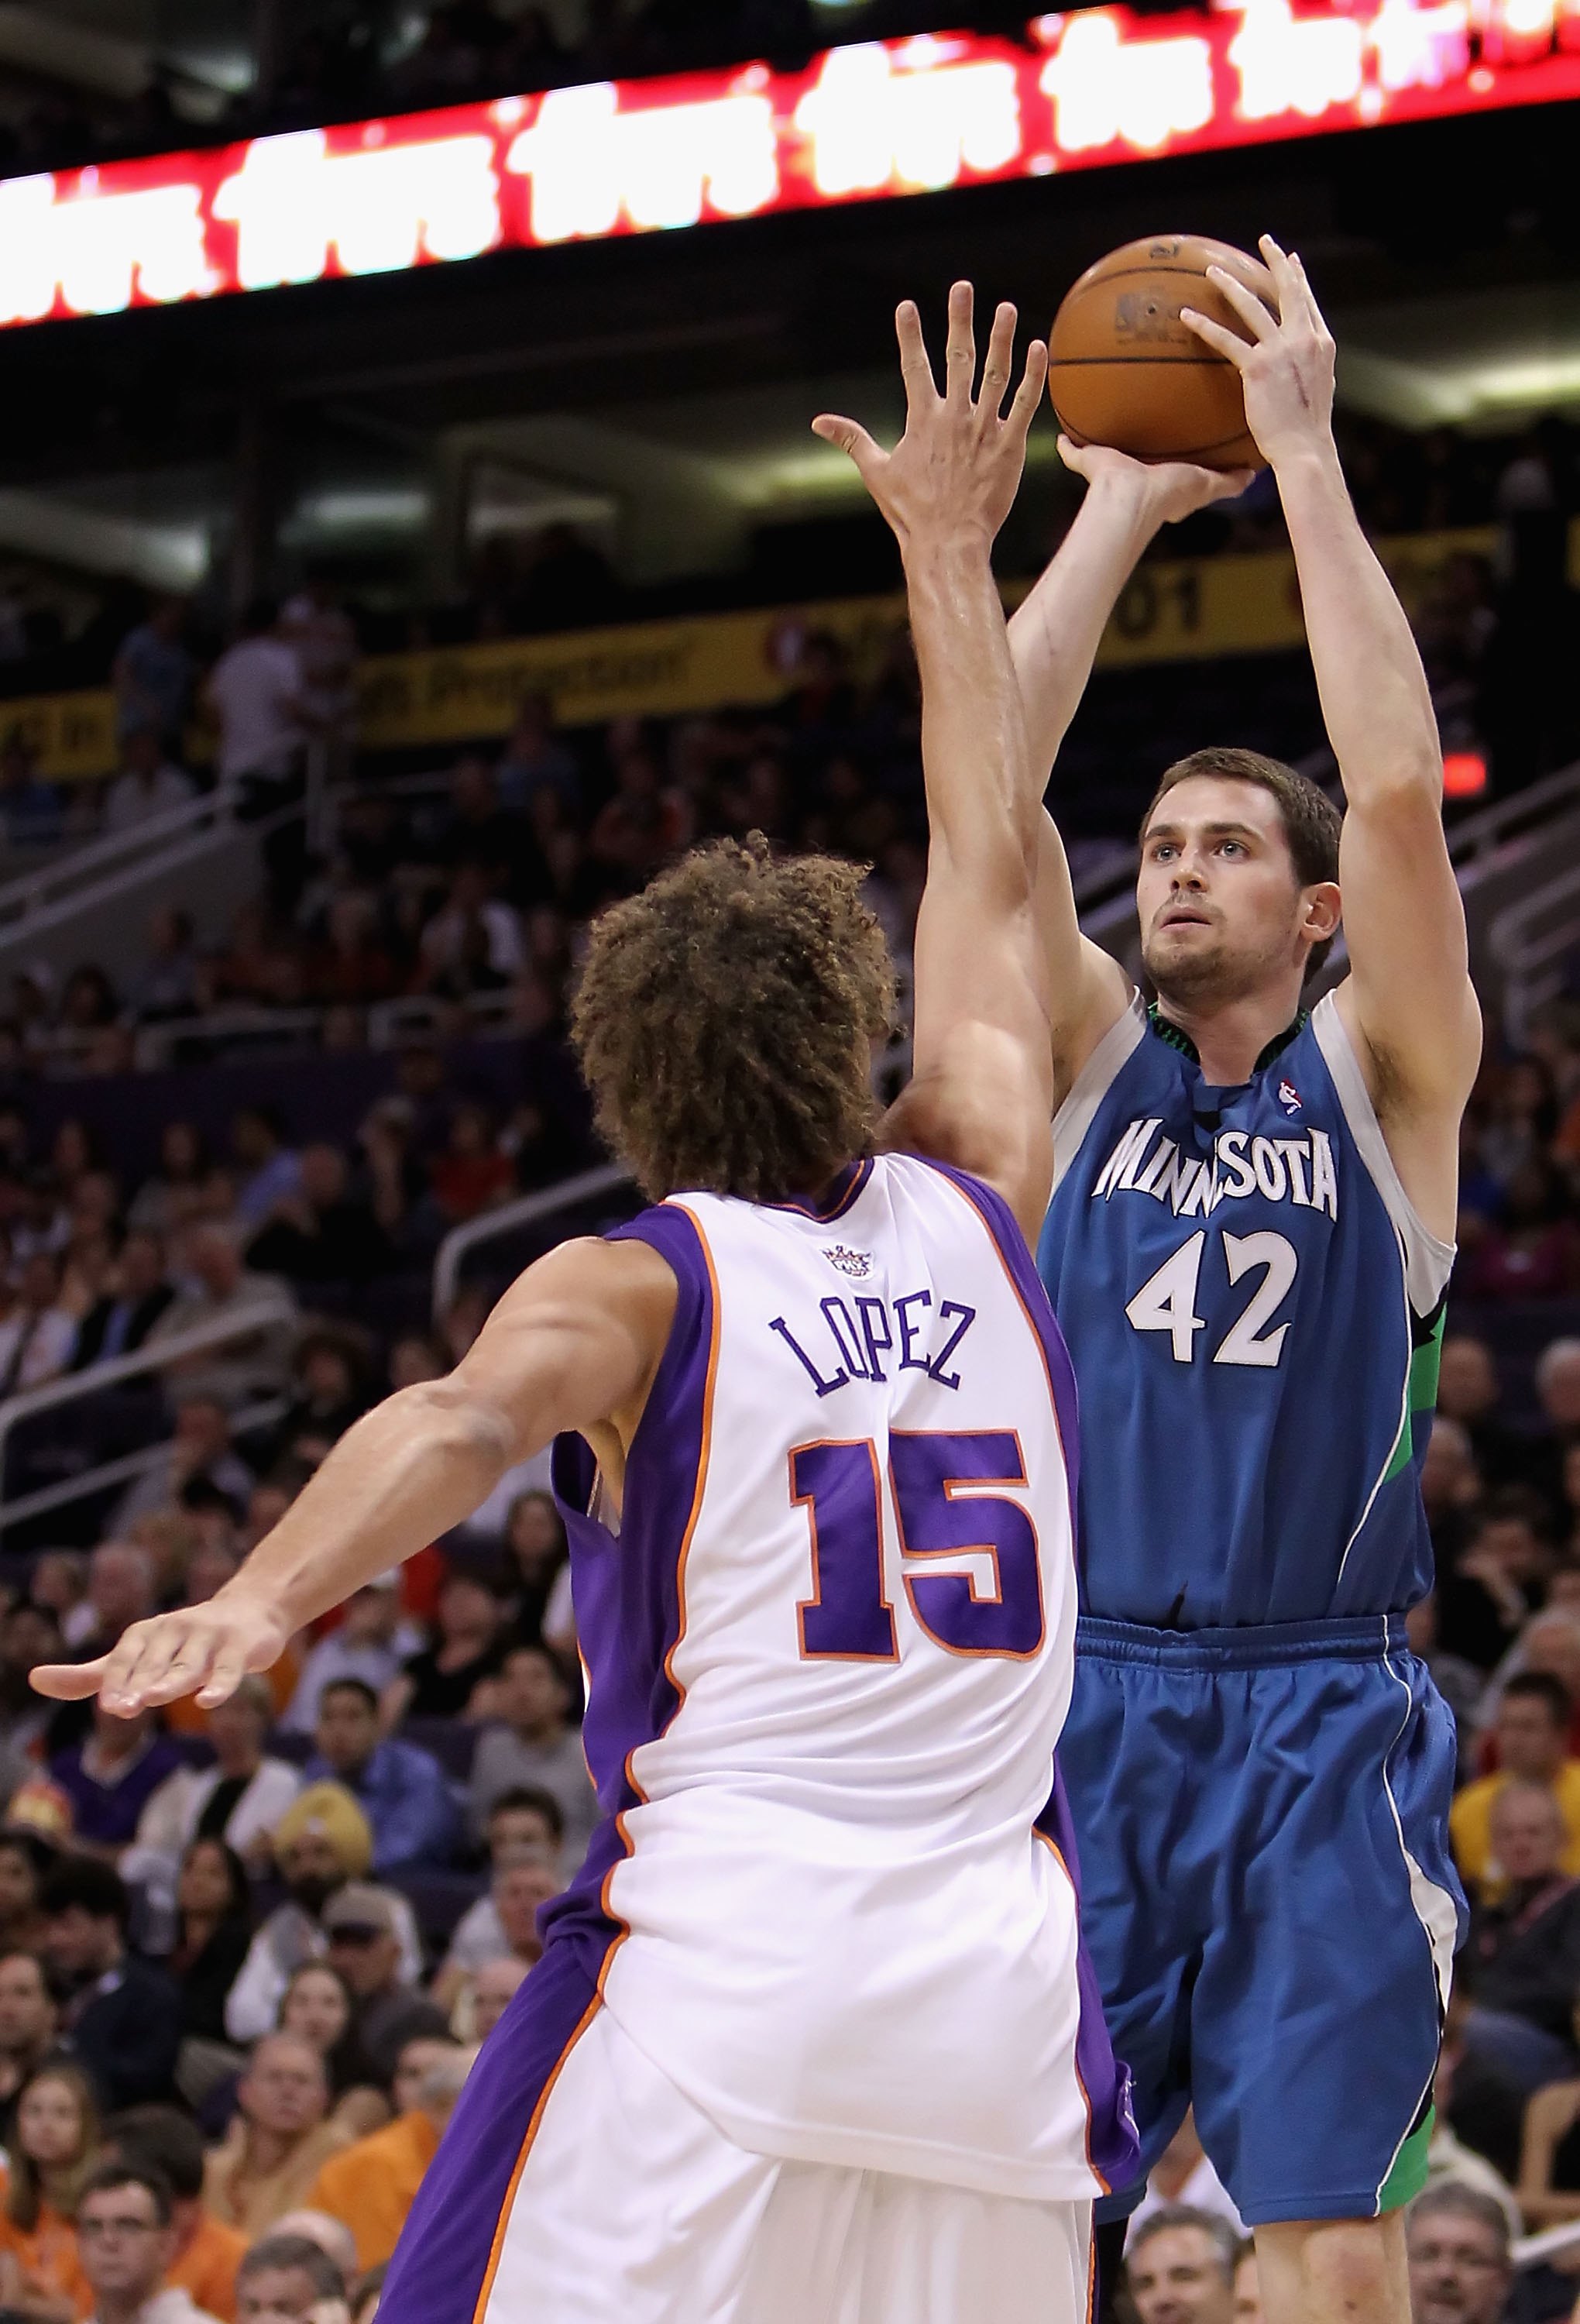 PHOENIX - MARCH 16:  Kevin Love #42 of the Minnesota Timberwolves puts up a shot during the NBA game against the Phoenix Suns at US Airways Center on March 16, 2010 in Phoenix, Arizona. The Suns defeated the Timberwolves 152-114.  NOTE TO USER: User expre